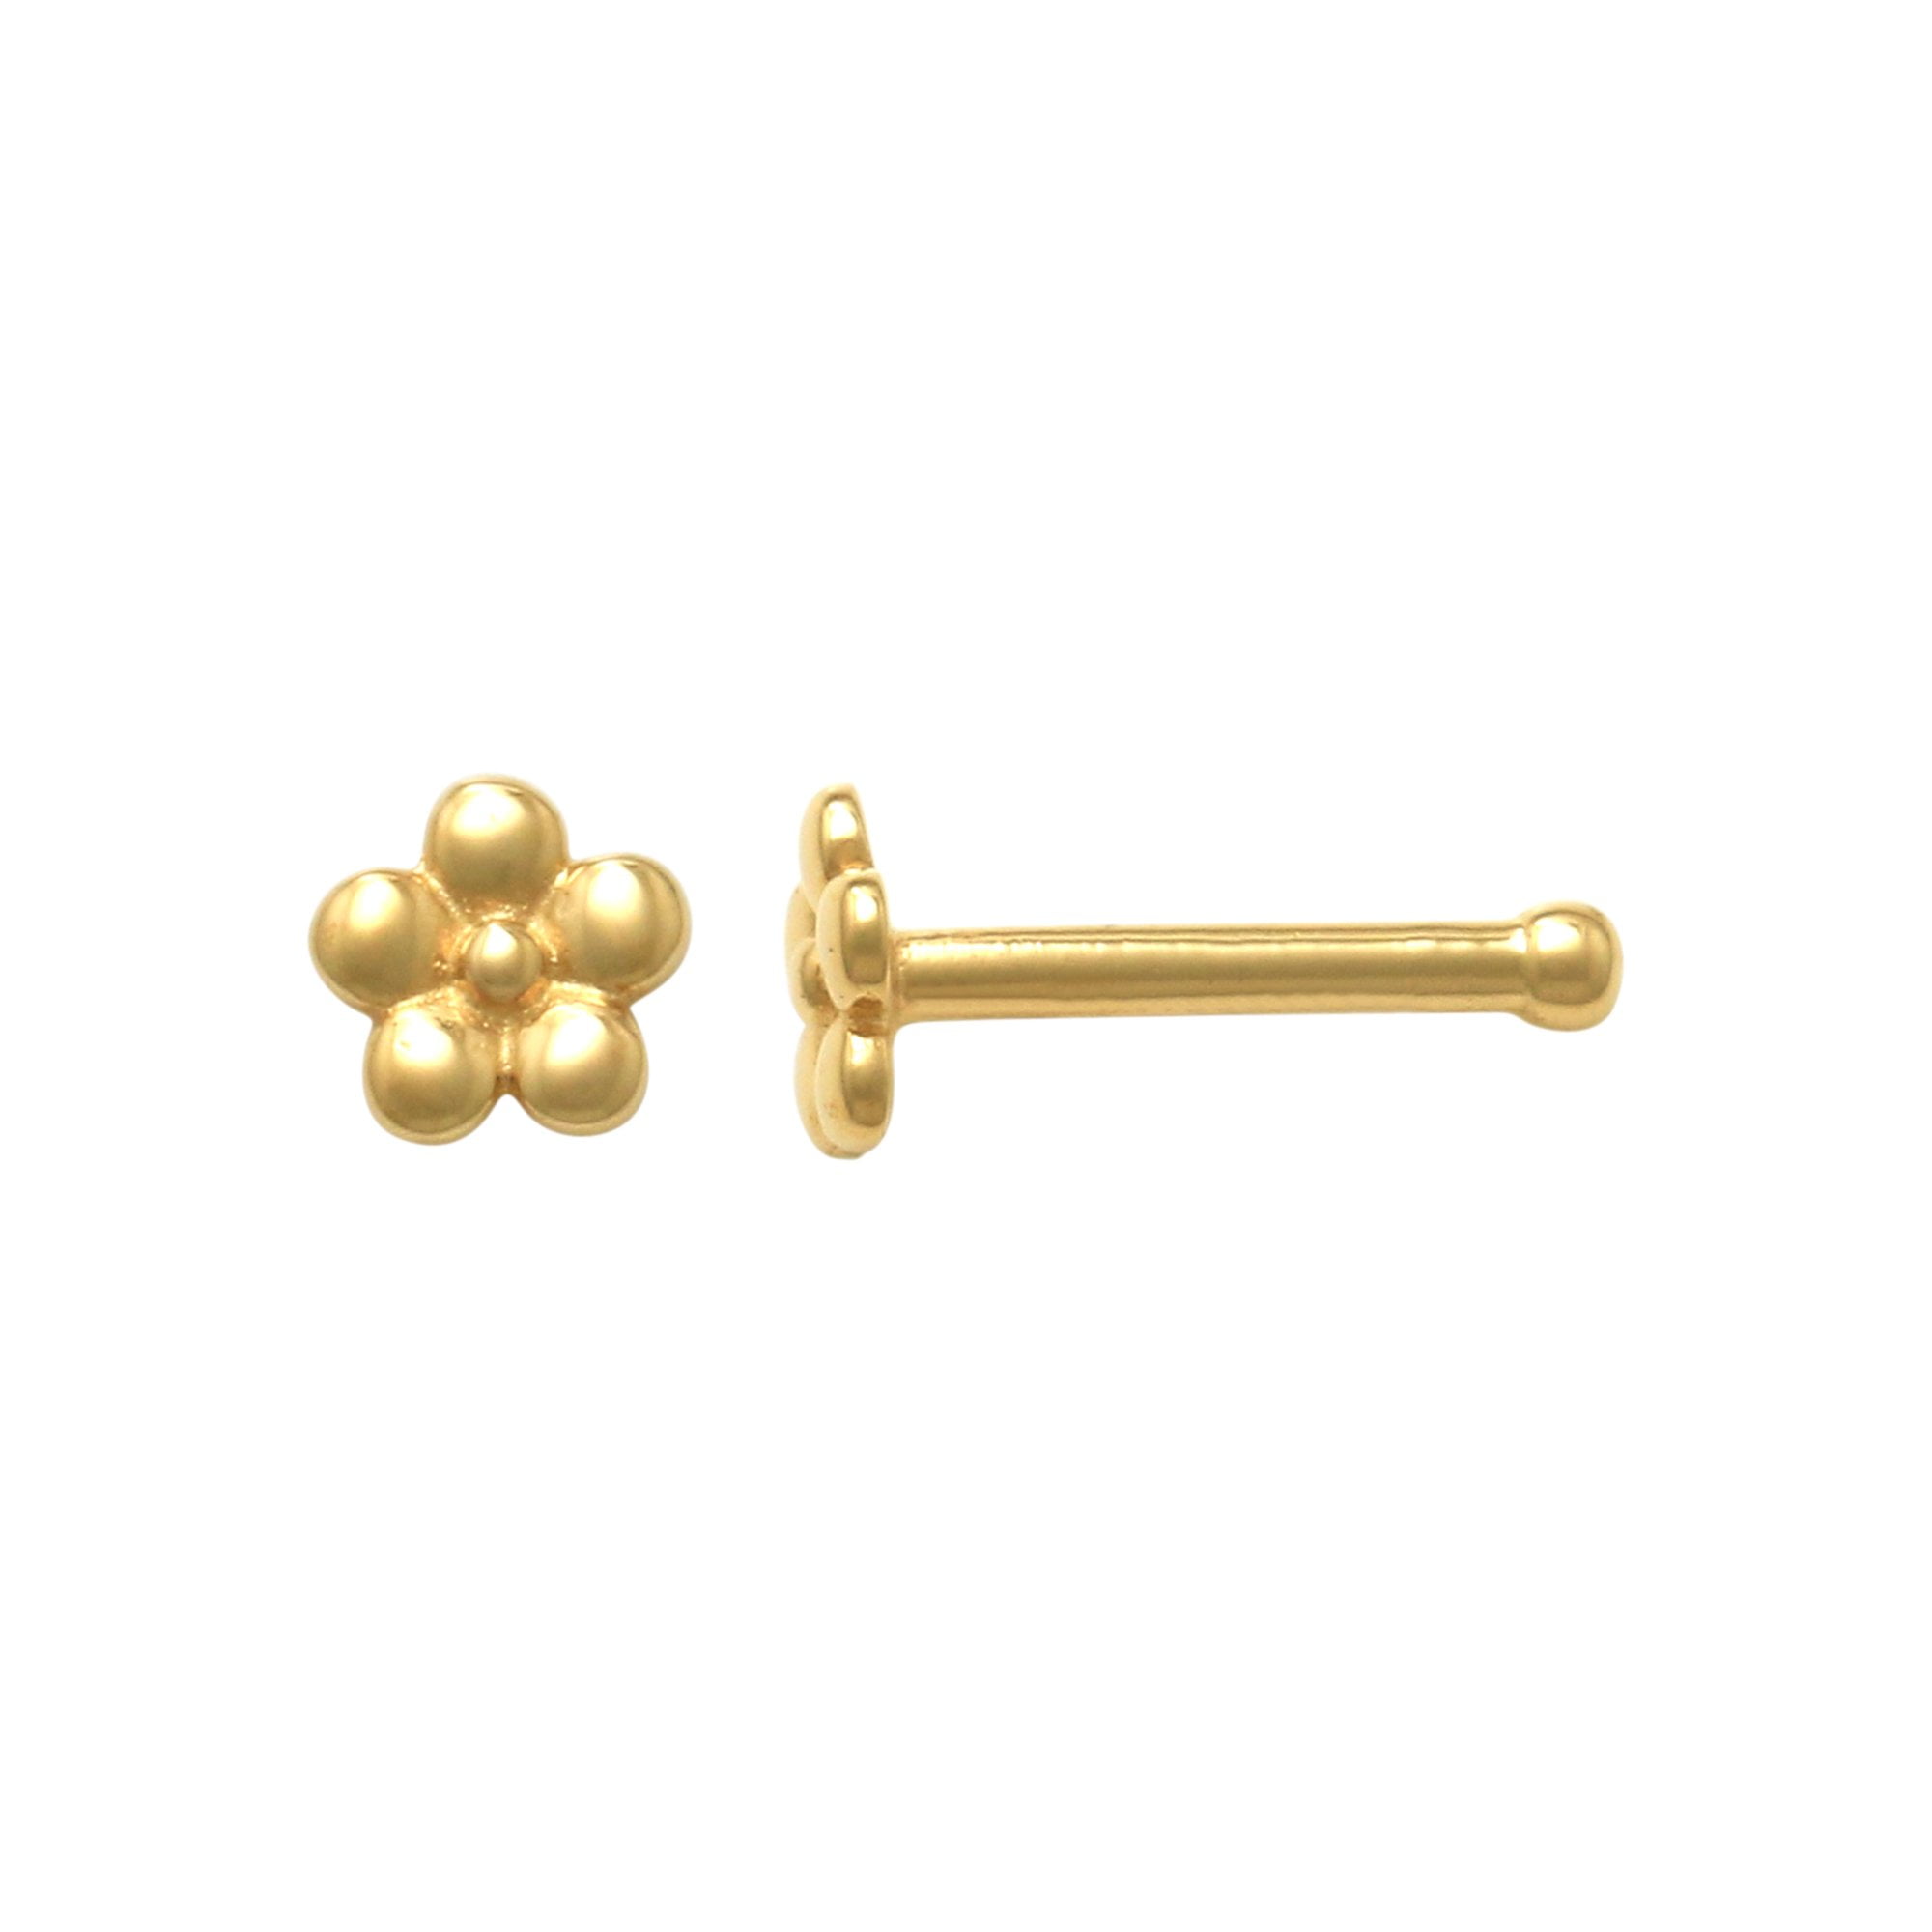 Solid 14kt gold nose piericng with a tiny all gold ball 20 gauge New Solid Gold